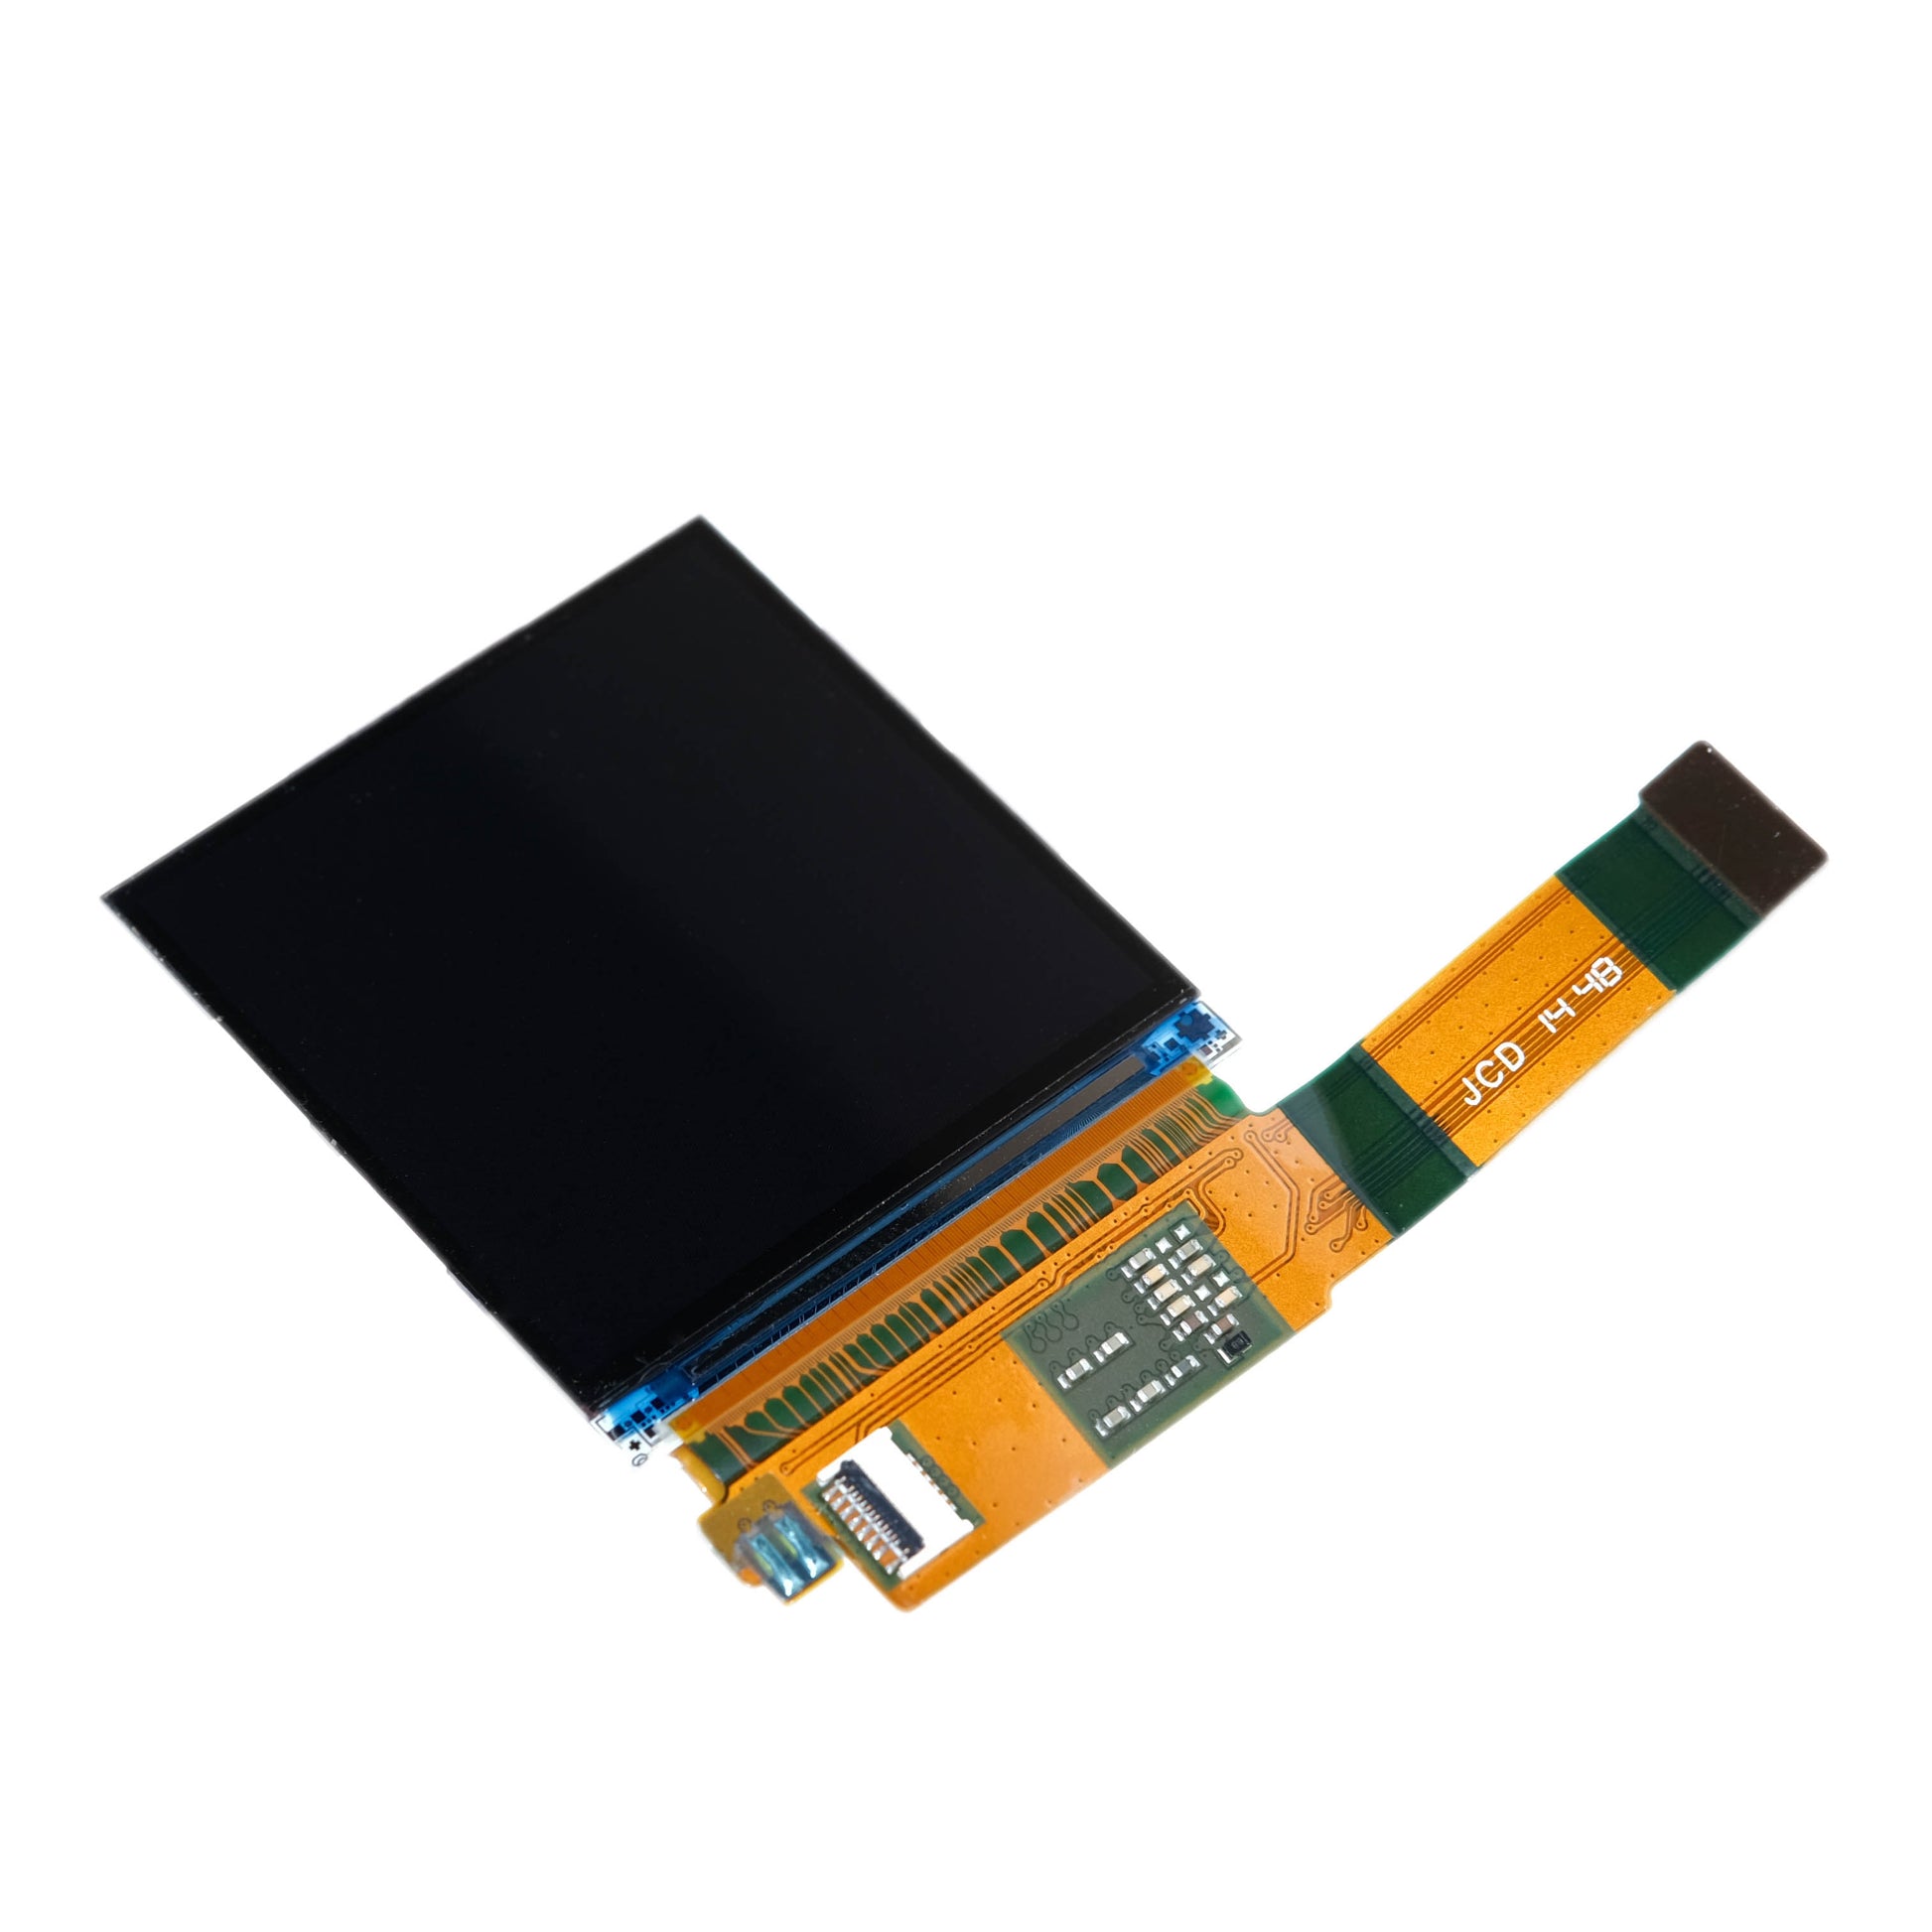 Top View of 1.6-inch TFT Transflective Display Panel